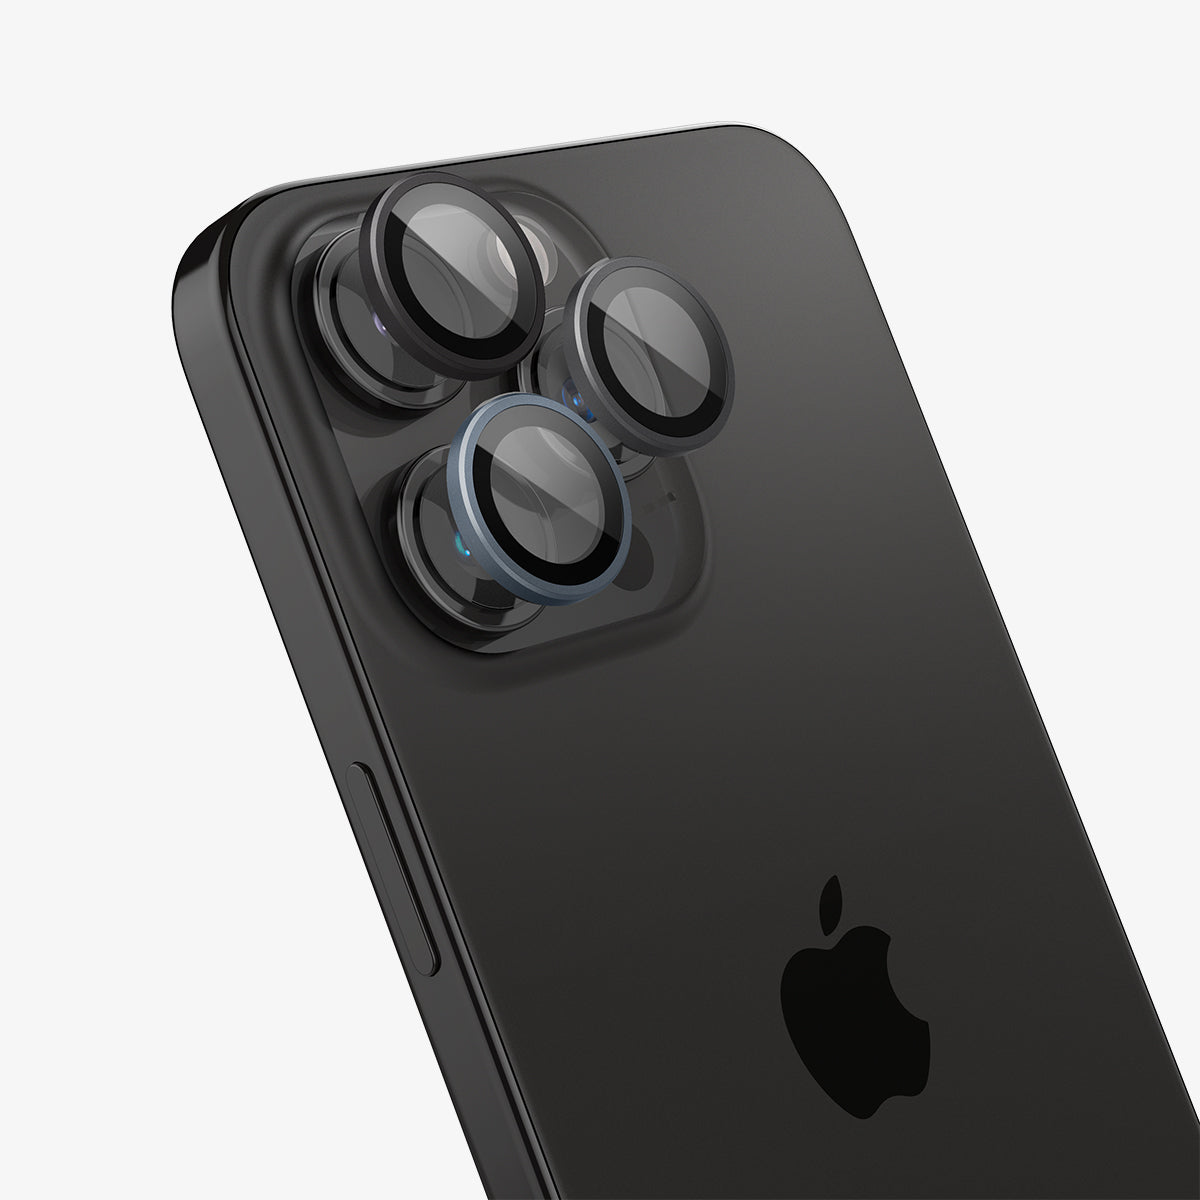 AGL06159 - iPhone 15 Pro / 15 Pro Max Optik Pro Lens Protector in zero one showing the lens protector hovering slightly in front of the camera lens